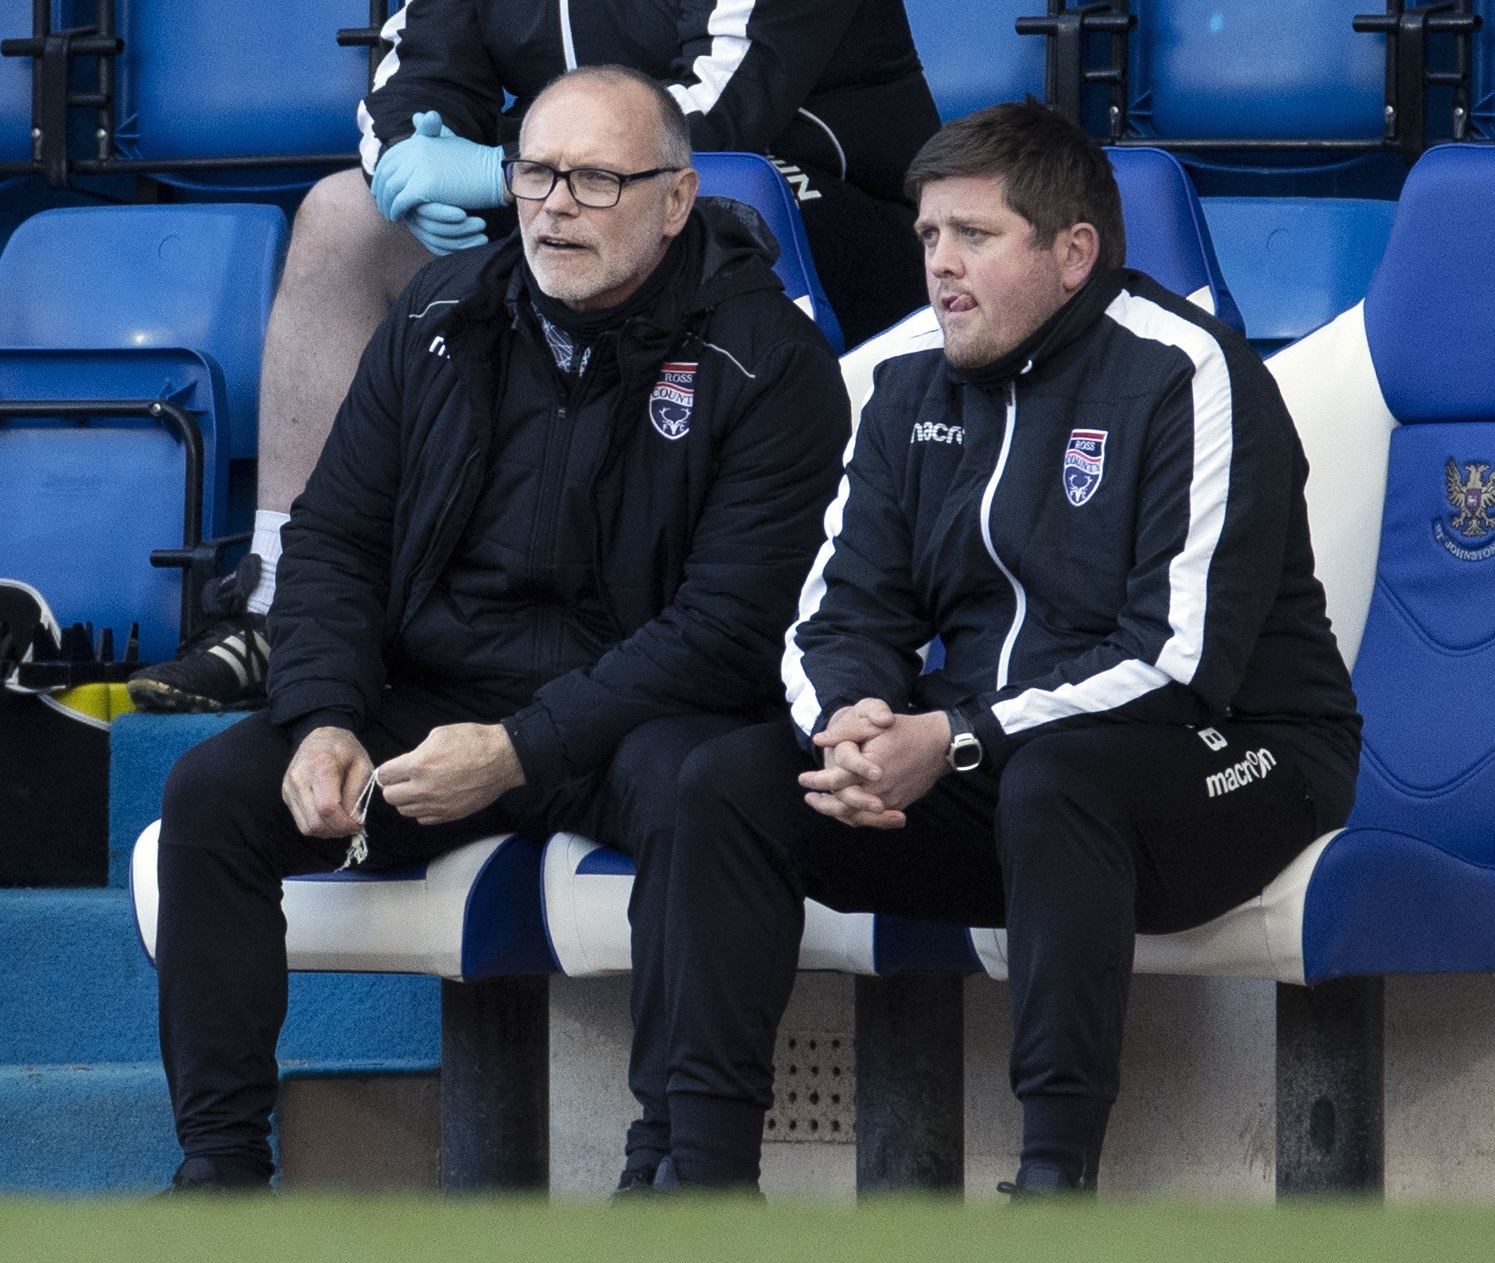 Picture - Ken Macpherson, Inverness. St. Johnstone(1) v Ross County(?0). 20.03.21. Ross County manager John Hughes and assistant manager Richie Brittain.